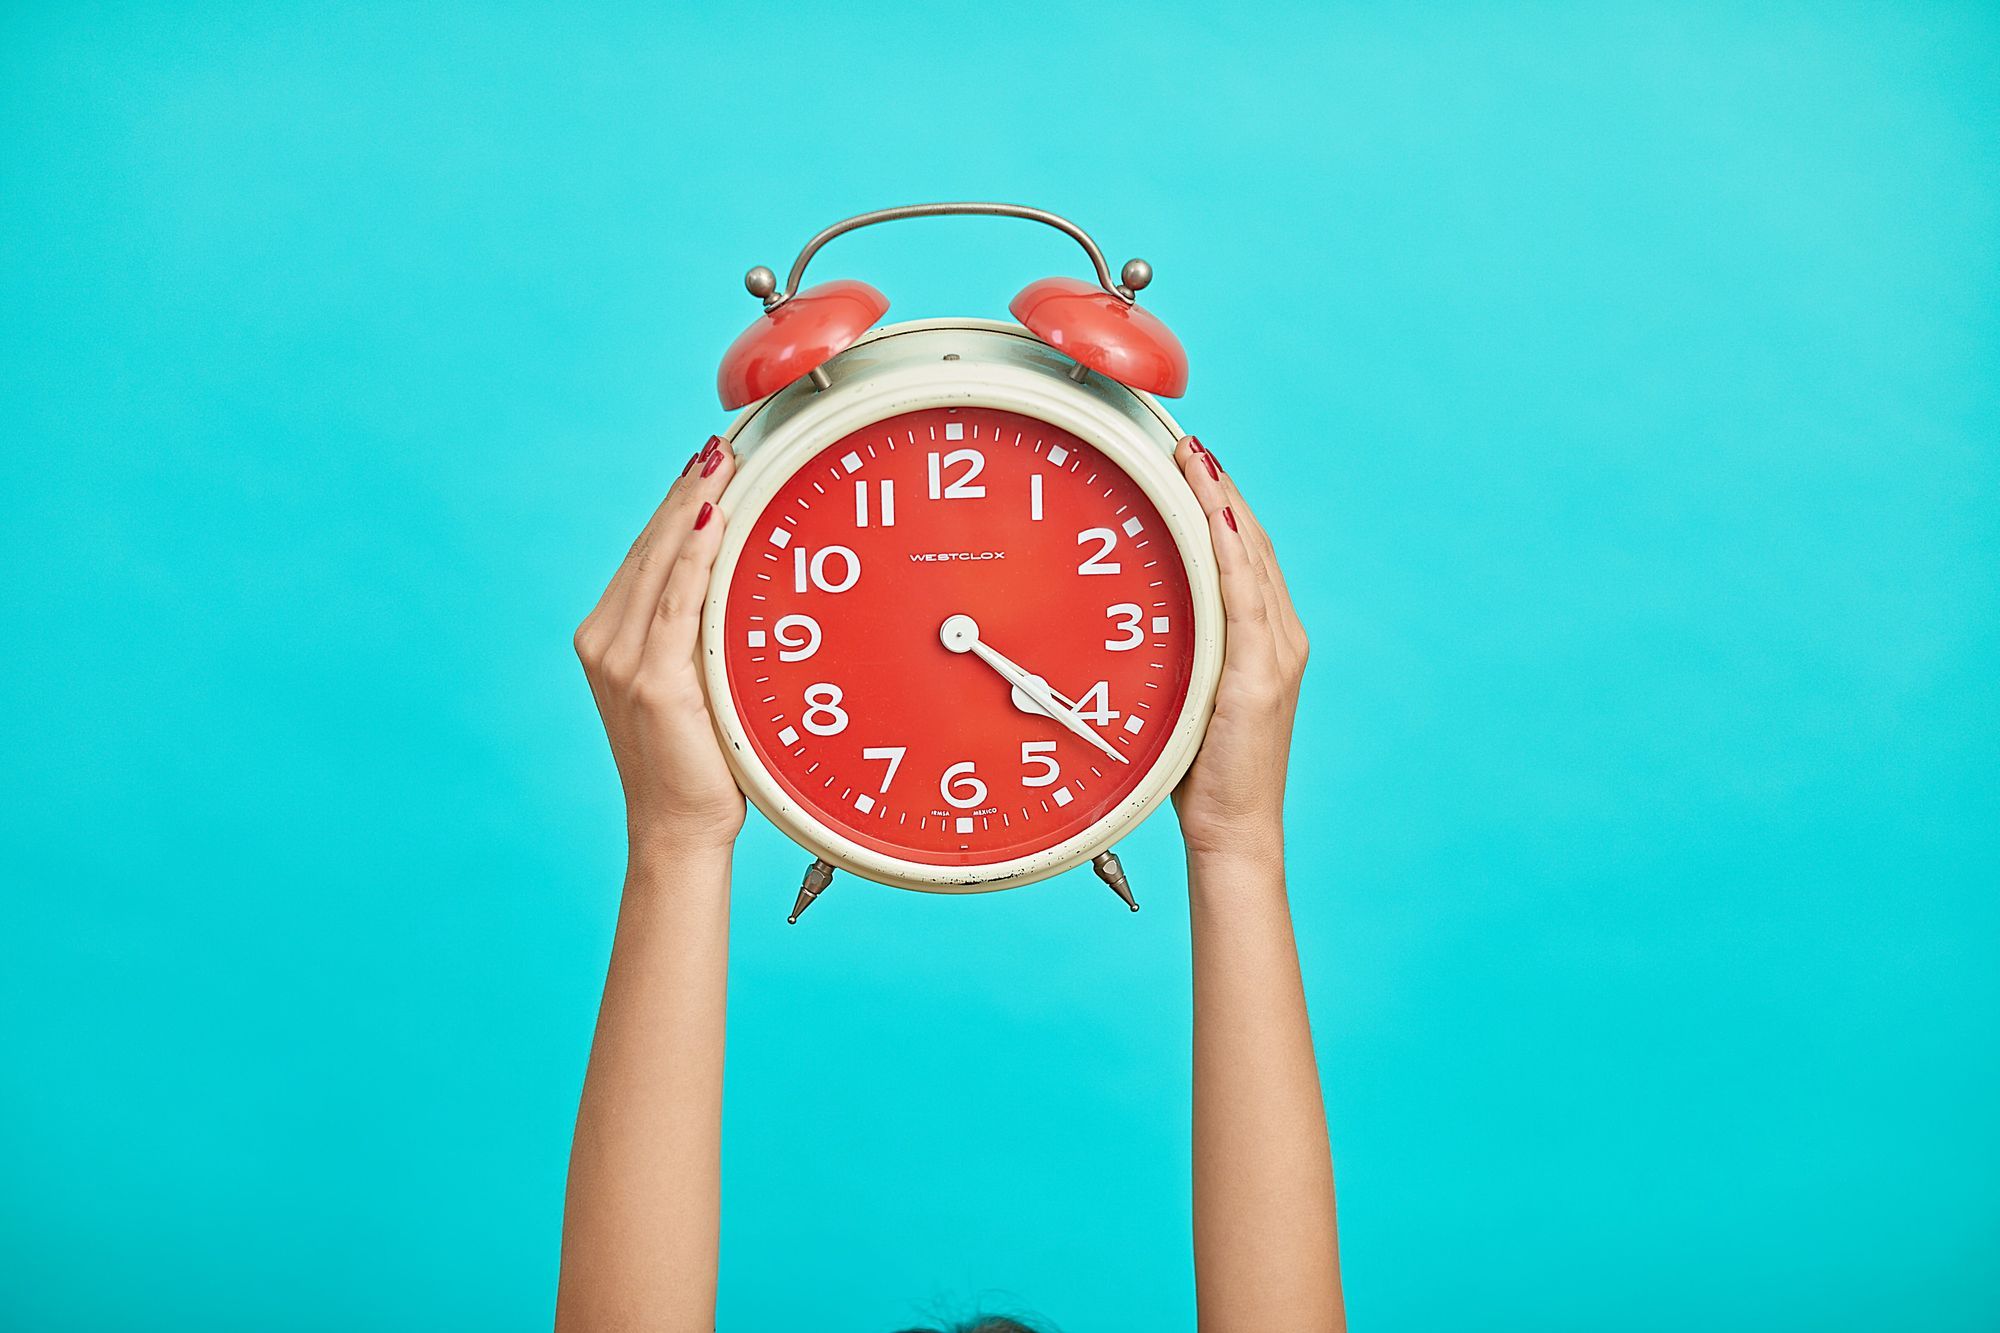 A pair of hands holding up a large red alarm clock with a white frame, set against a bright turquoise background. The clock displays 4:22 time. The person's nails are painted in a vibrant red to match the clock's face.